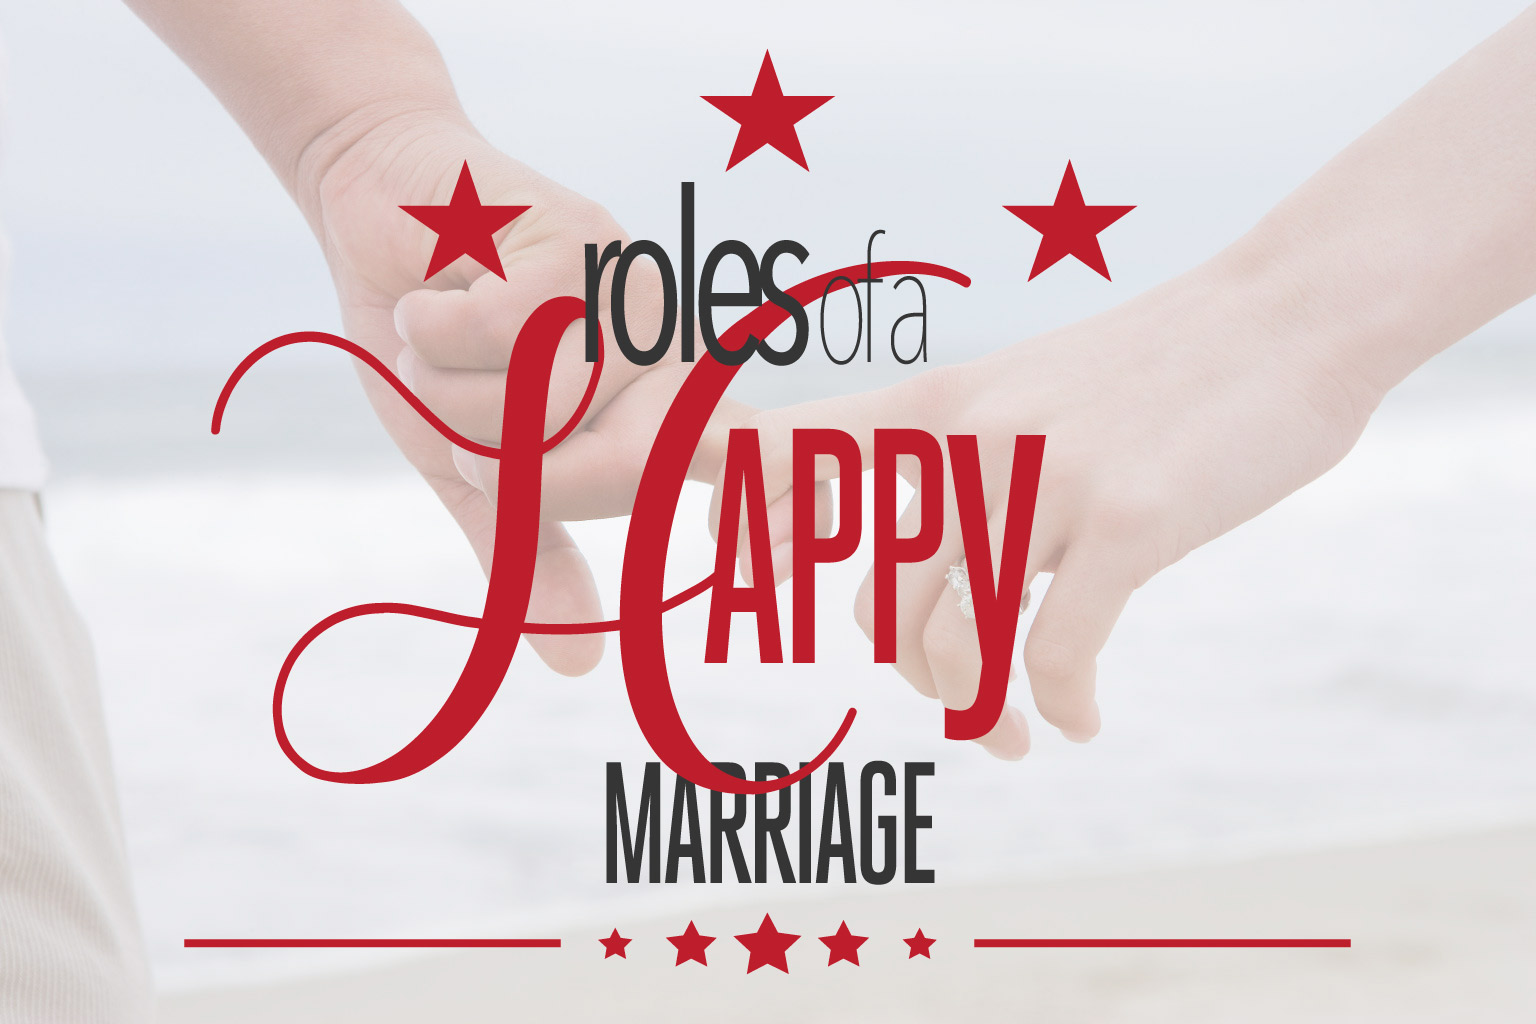 Roles of a Happy Marriage